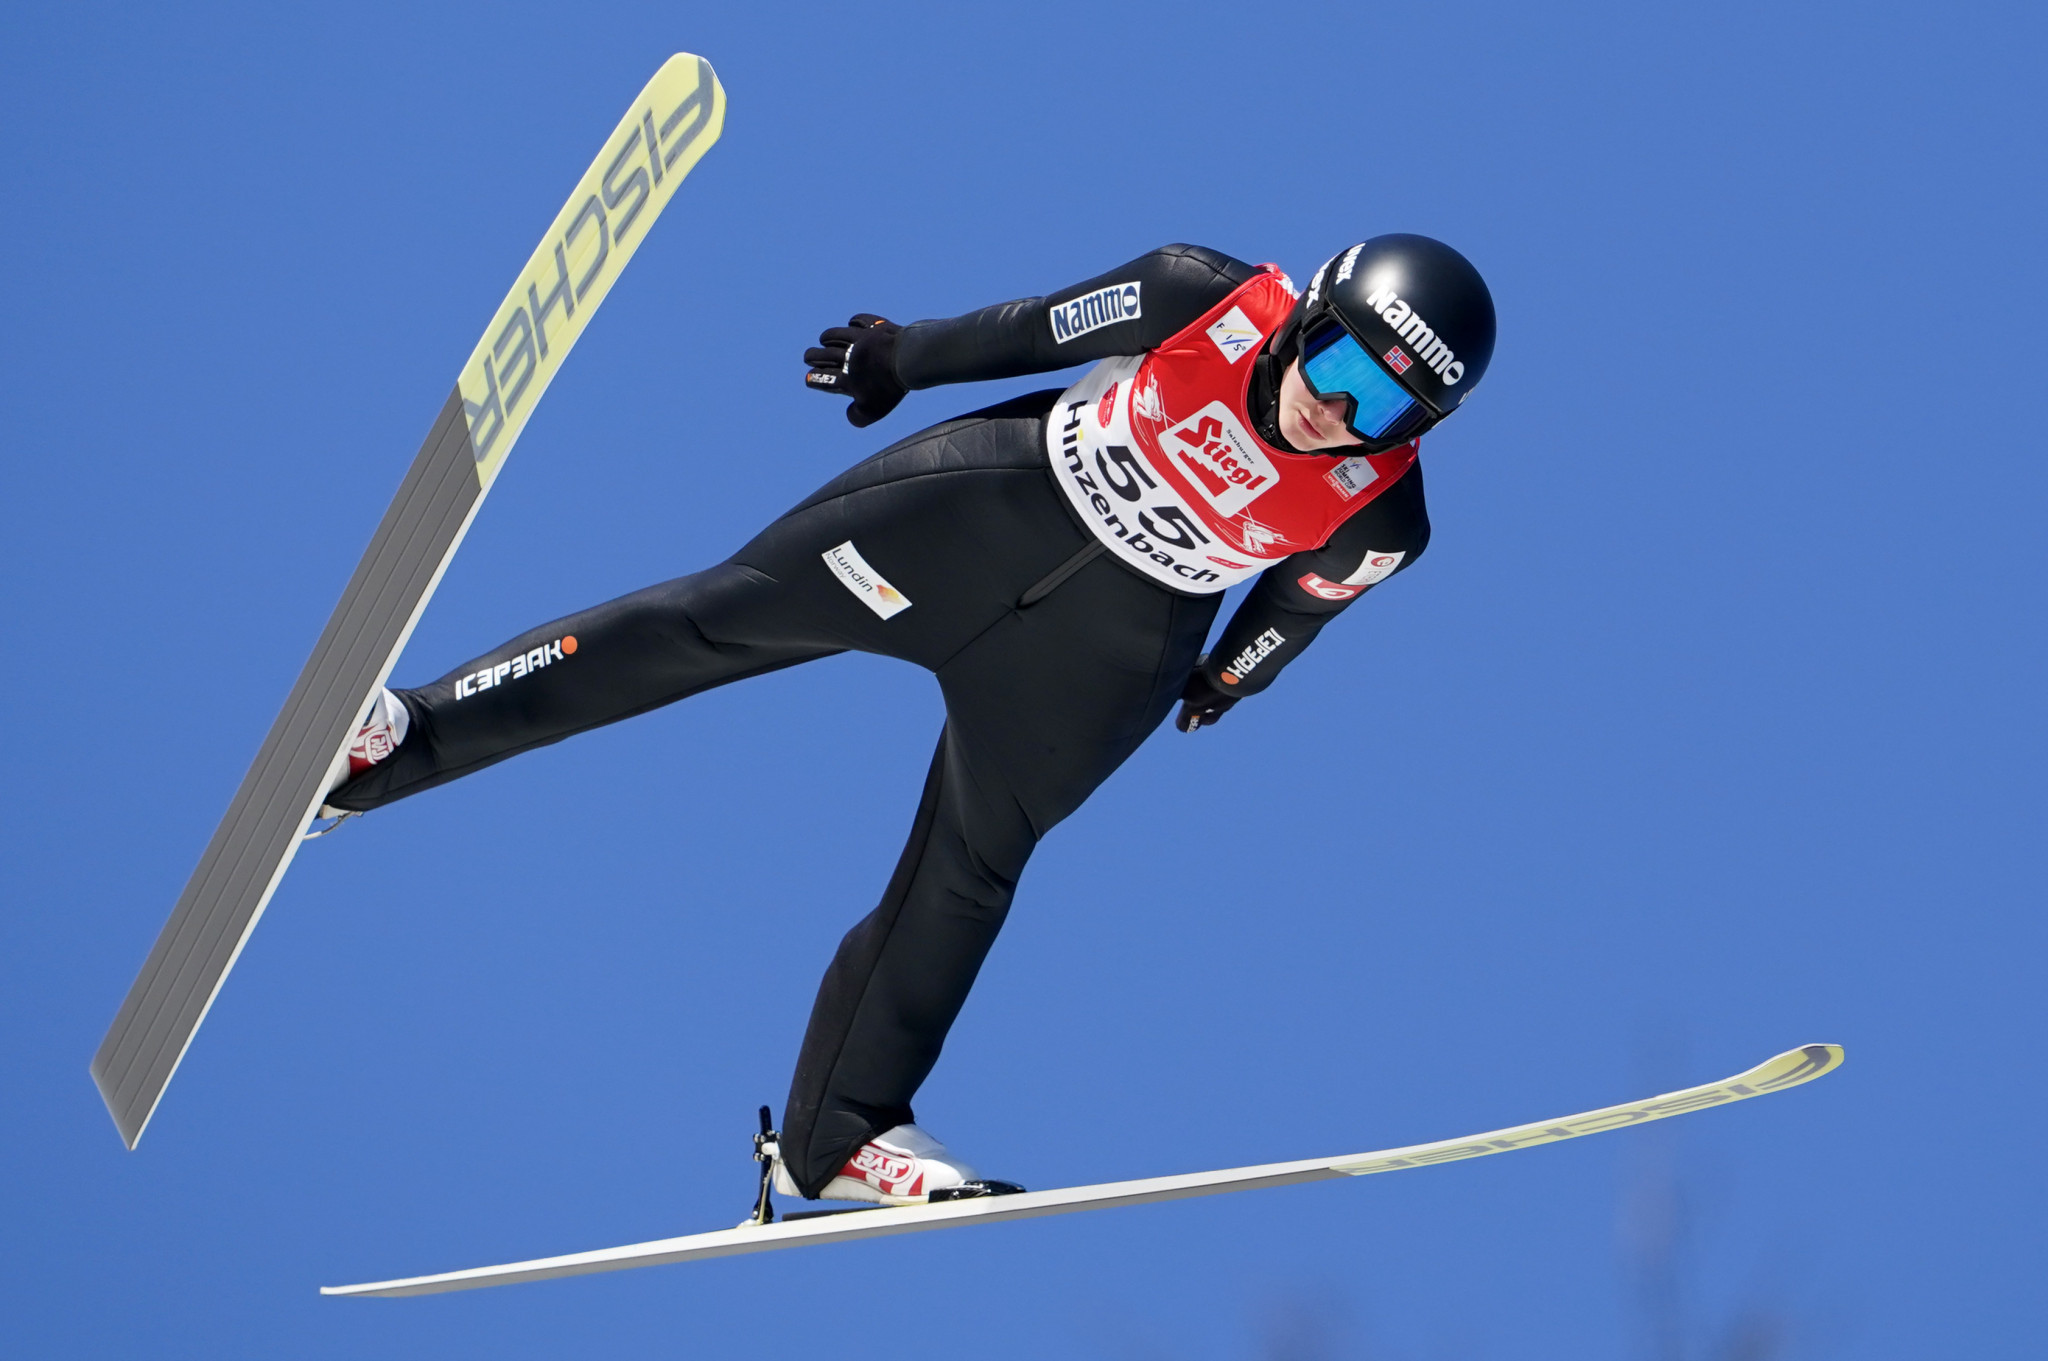 Silje Opseth topped qualifying at the FIS Ski Jumping World Cup in Ljubno ©Getty Images